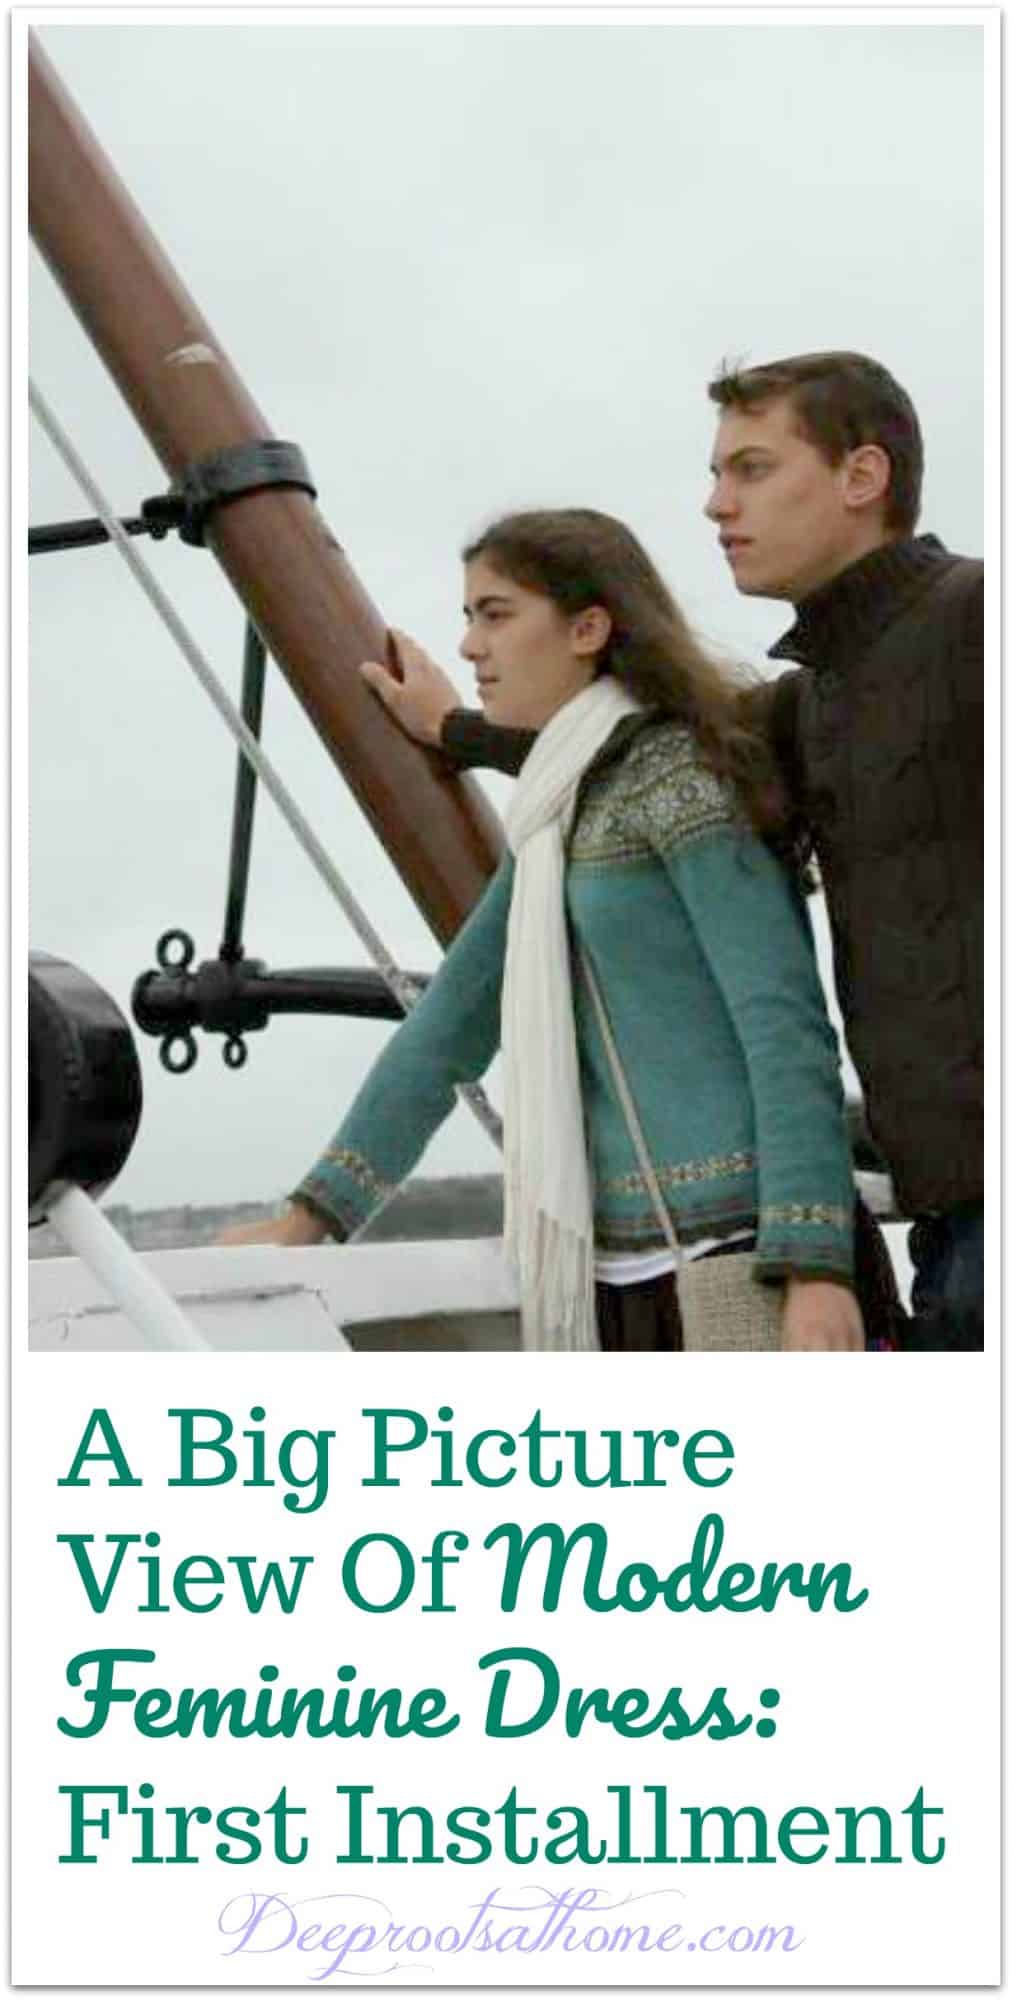 A Big Picture View Of Modern Feminine Dress: First Installment. A man and woman in classic cardigans on a ship